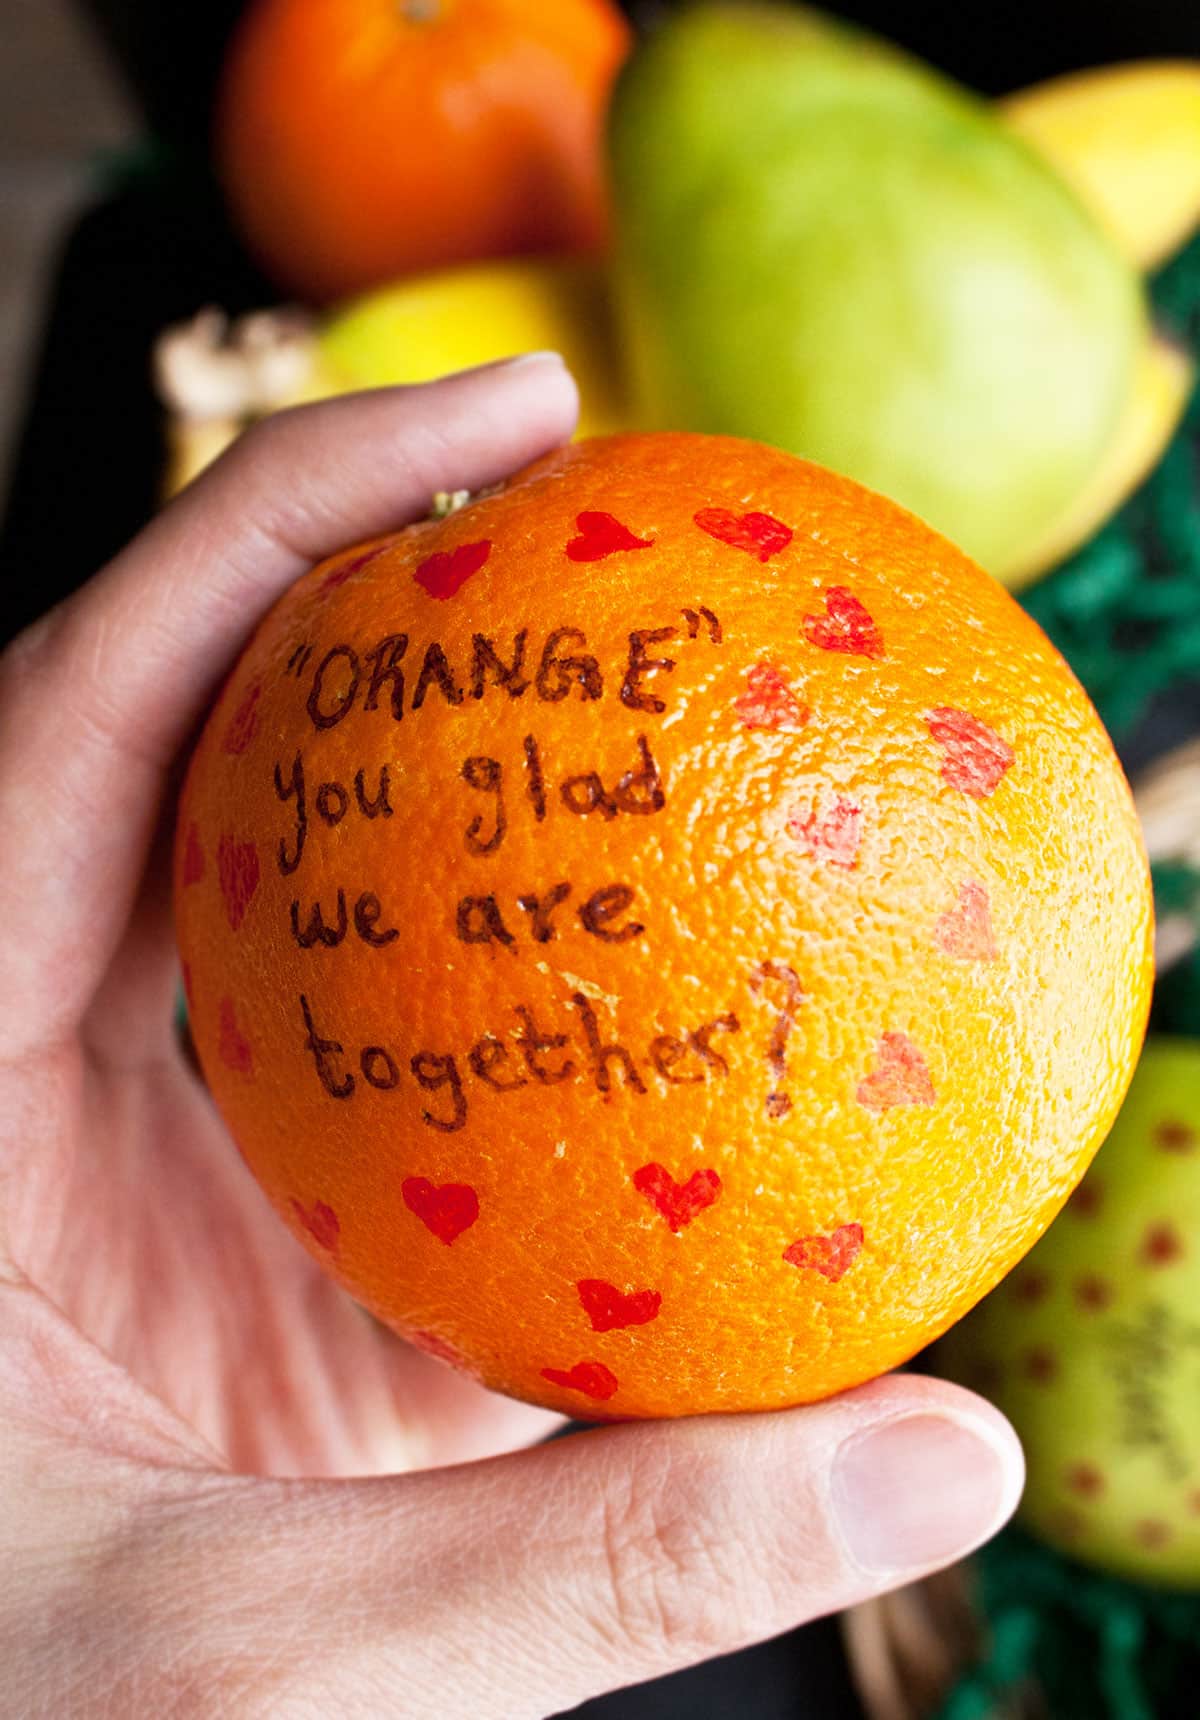 Valentine Oranges With A Cute Note: "Orange You Glad We Are Together."